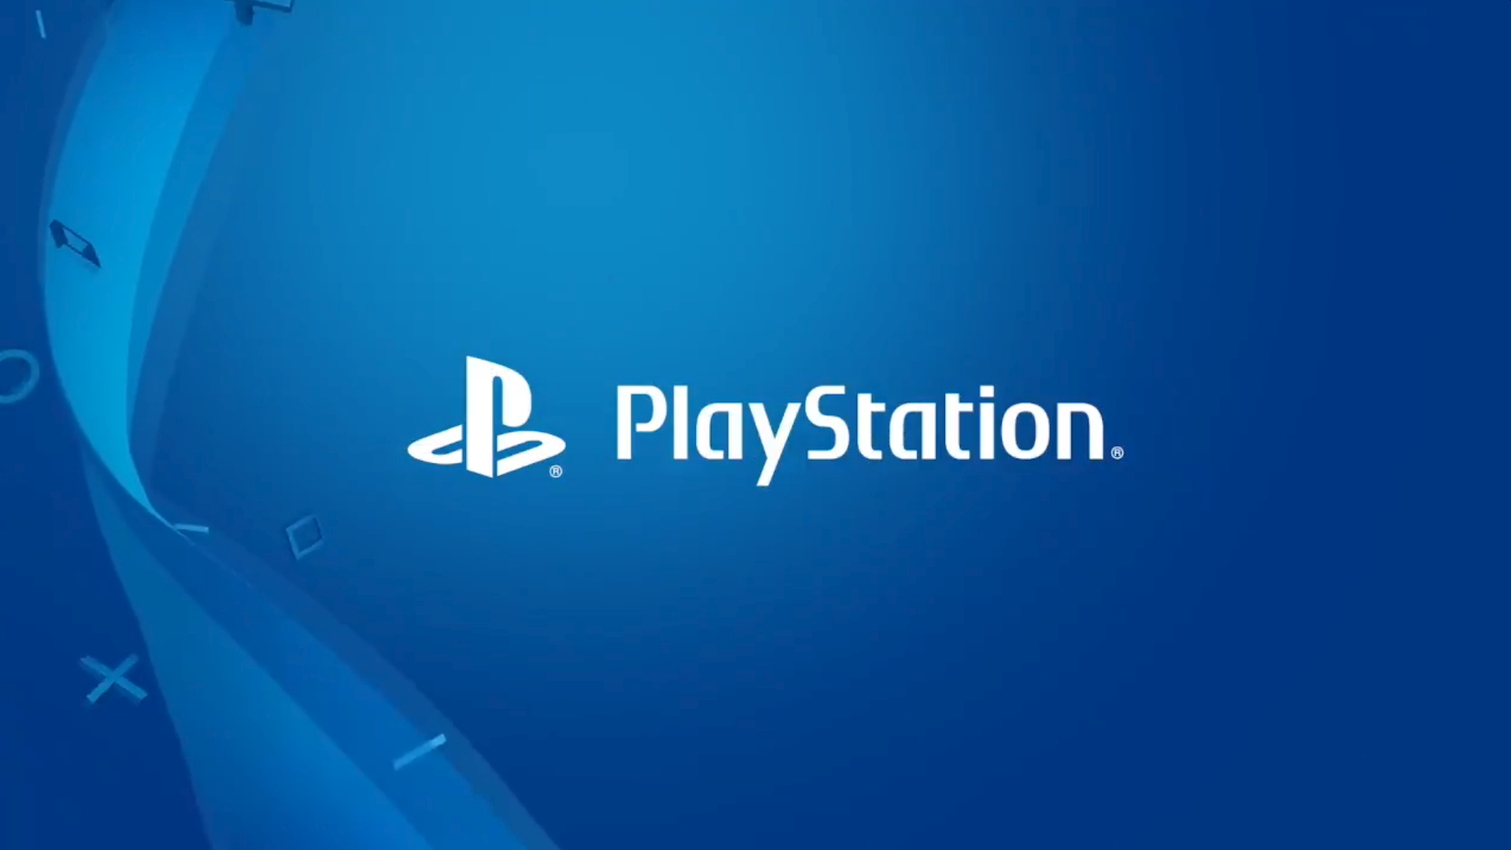 In A Recent Gamesindustry Interview, Sony’s Jim Ryan Insists The PlayStation 5 Is Still On Track For A 2020 Release